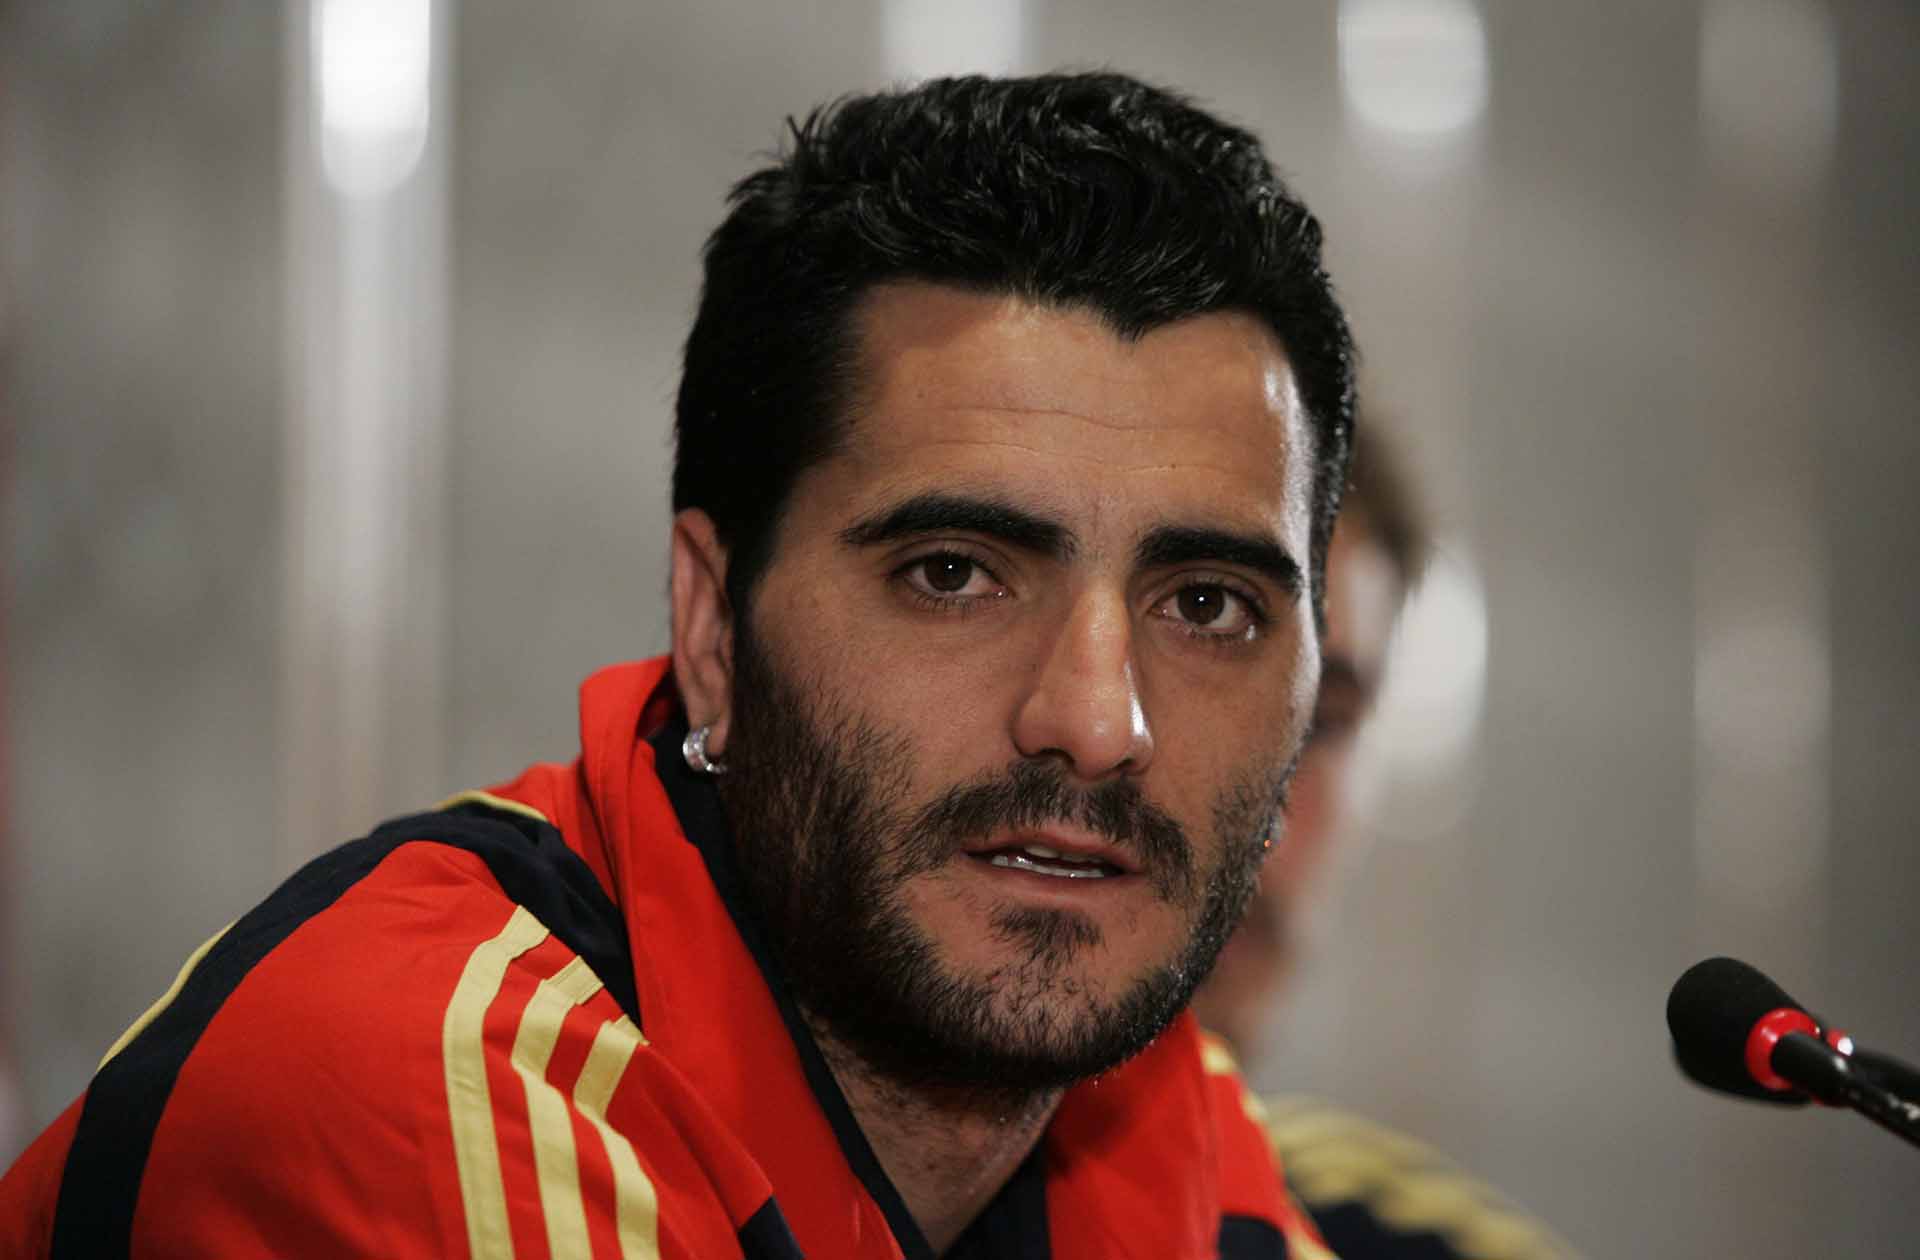 Spain’s Daniel Guiza talks during a press conference in Istanbul, Turkey, Tuesday, March. 31, 2009, a day before their World Cup group 5 qualifying soccer match against Turkey.